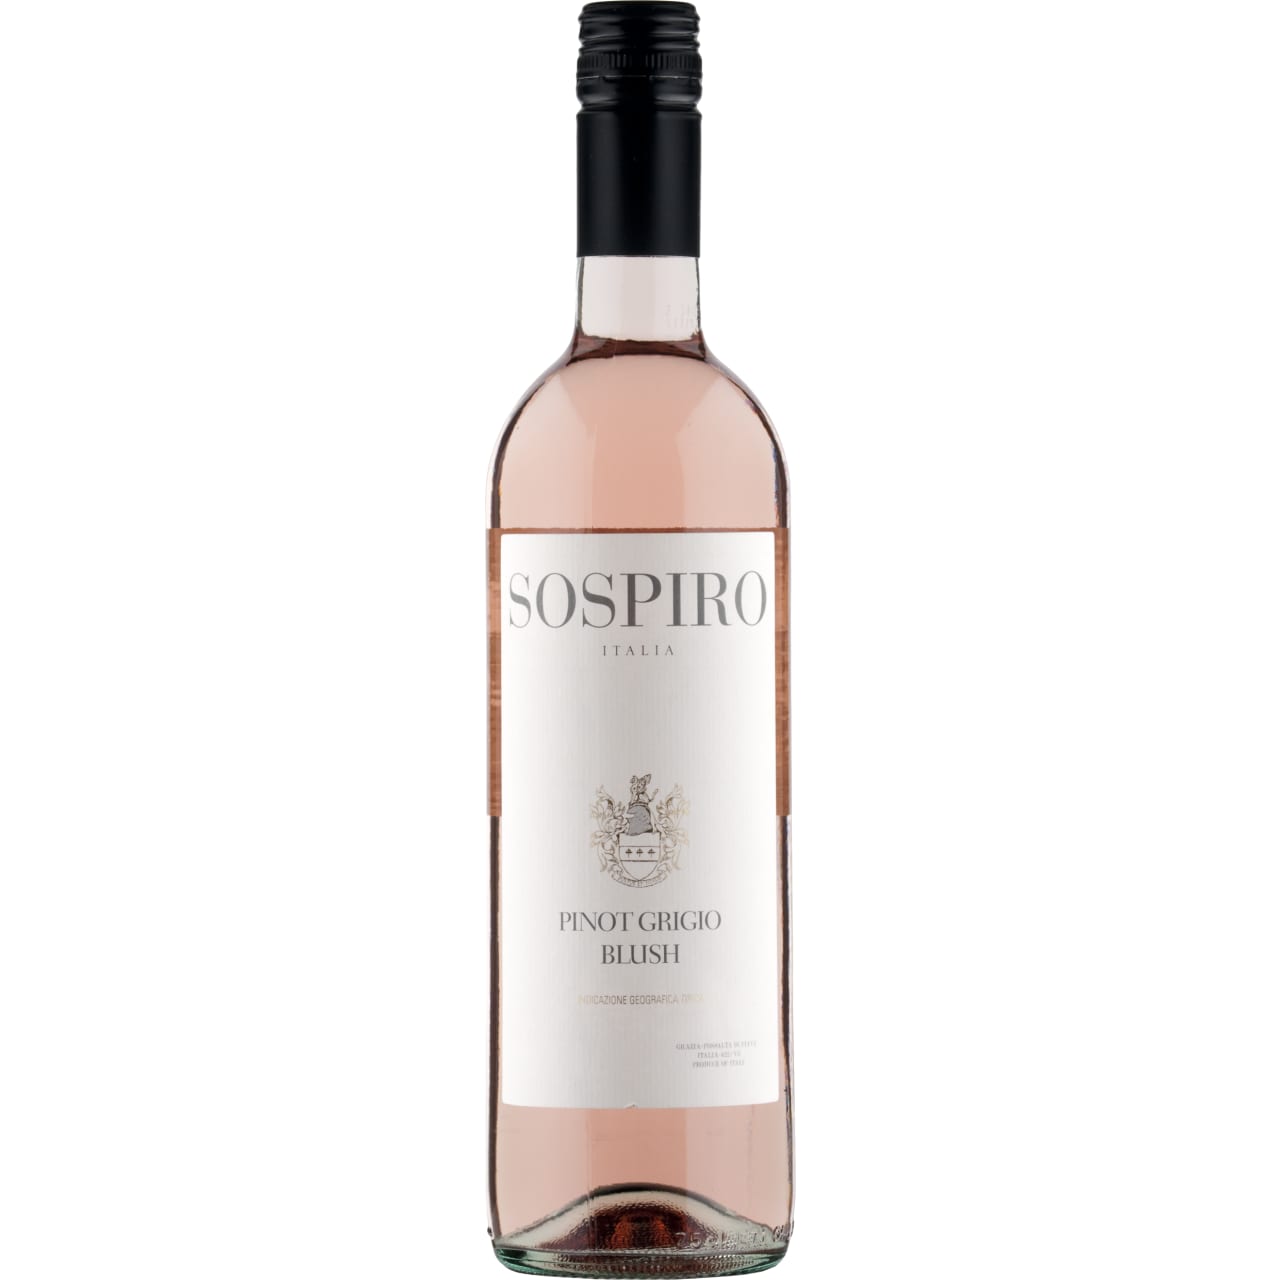 A delicious balance of zingy citrus and fruity red berry flavours lead this light, dry and crisp wine.